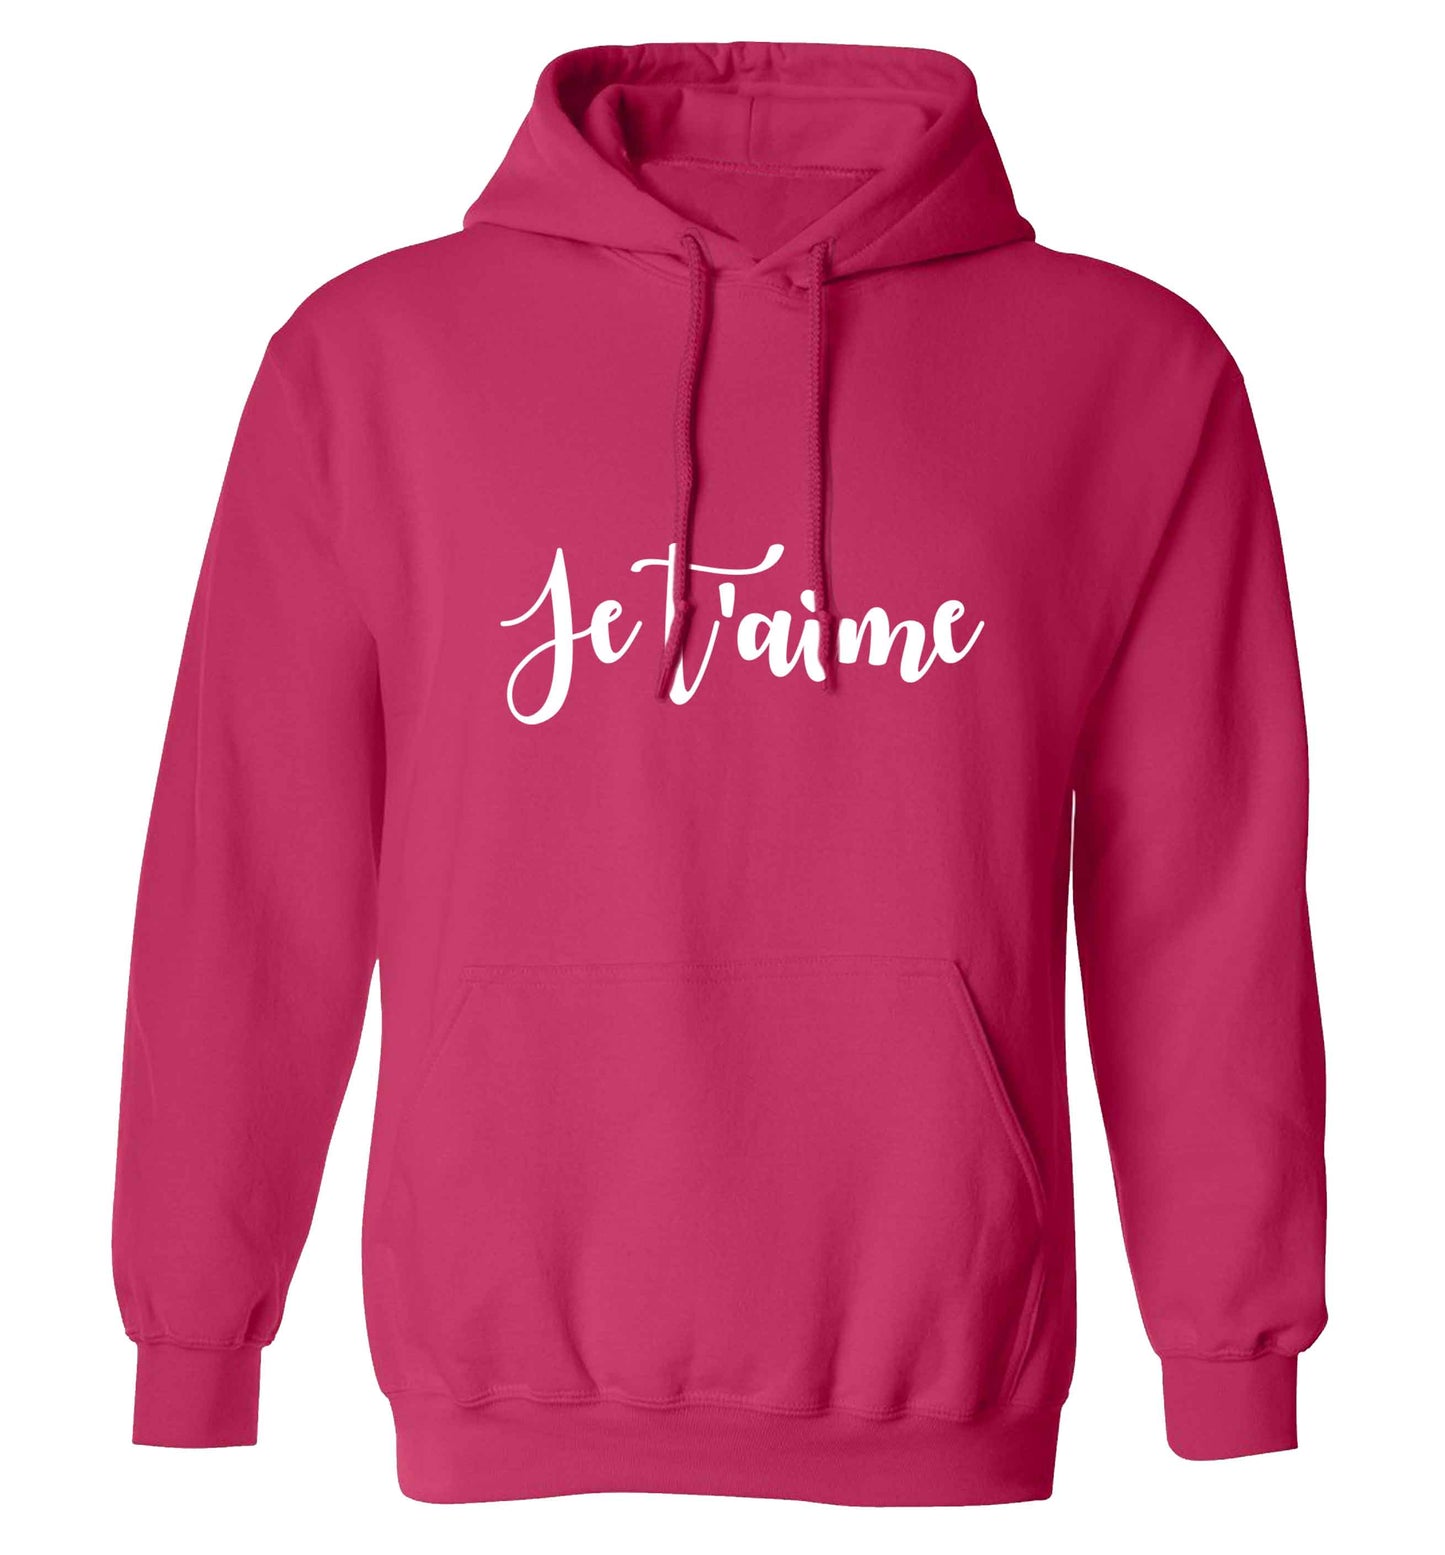 Je t'aime adults unisex pink hoodie 2XL